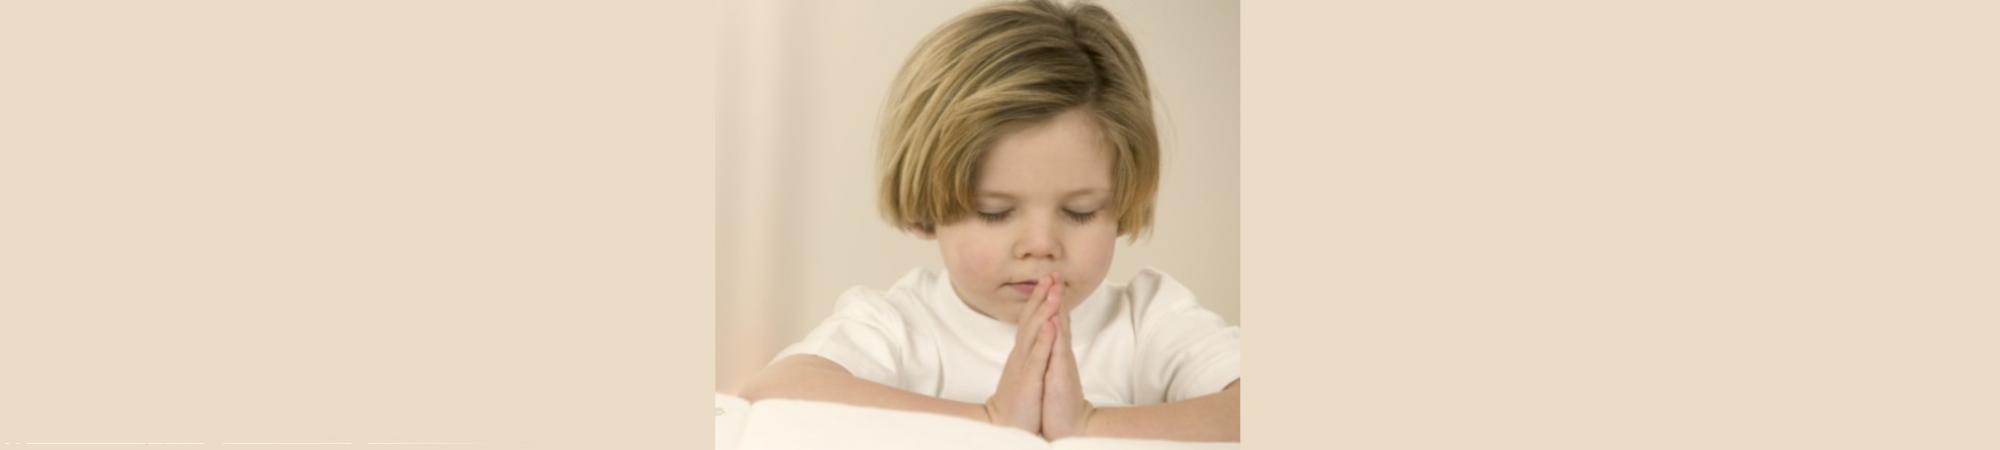 3-year-old girl in prayingl position. Soft pink. 